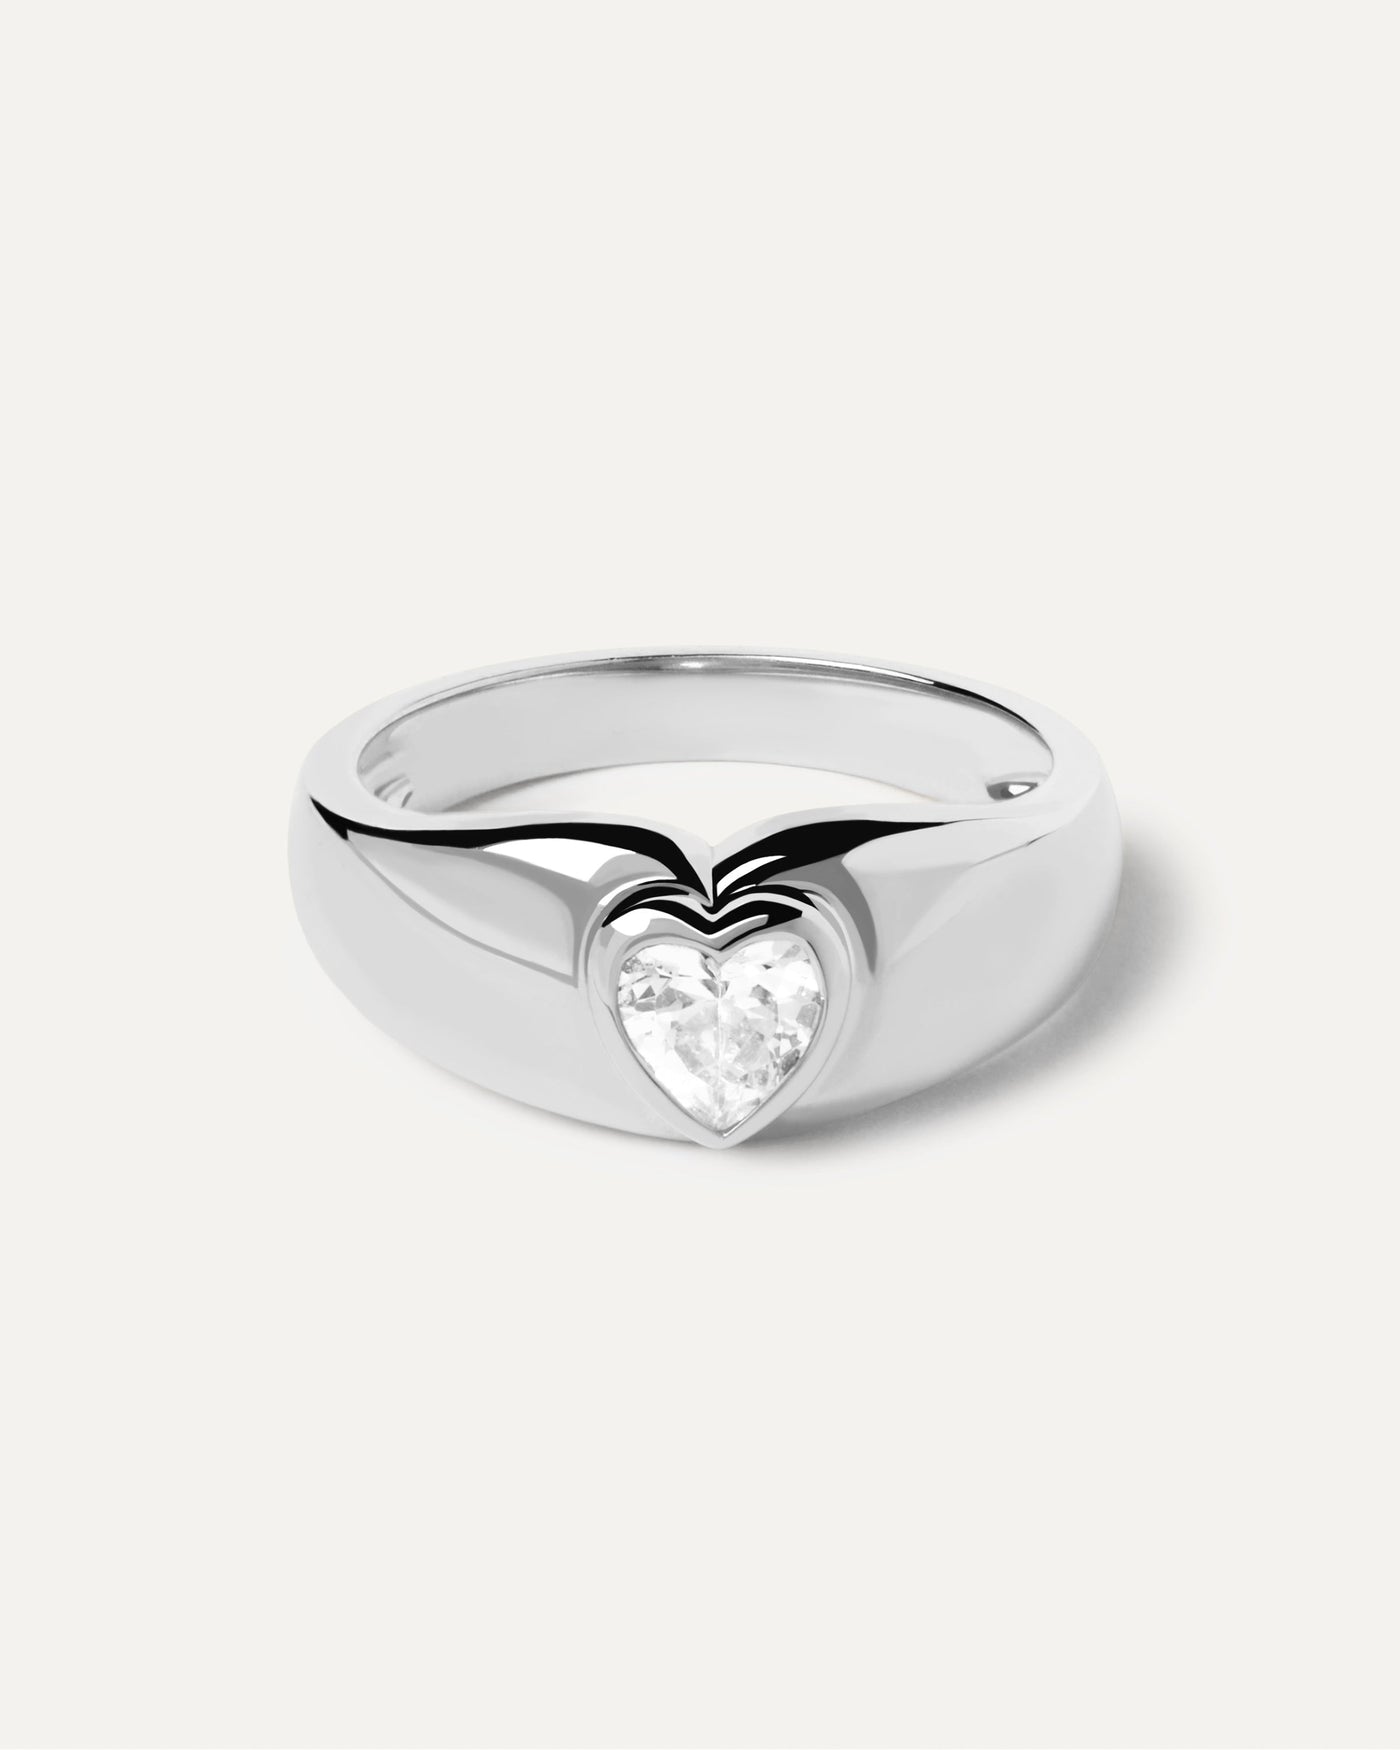 Buy Paola Speical For Couple Ring Valentines Adjustable Diamond Heart Shape  Lover Ring Set Silver Plated Couple Ring Women And Men at Amazon.in